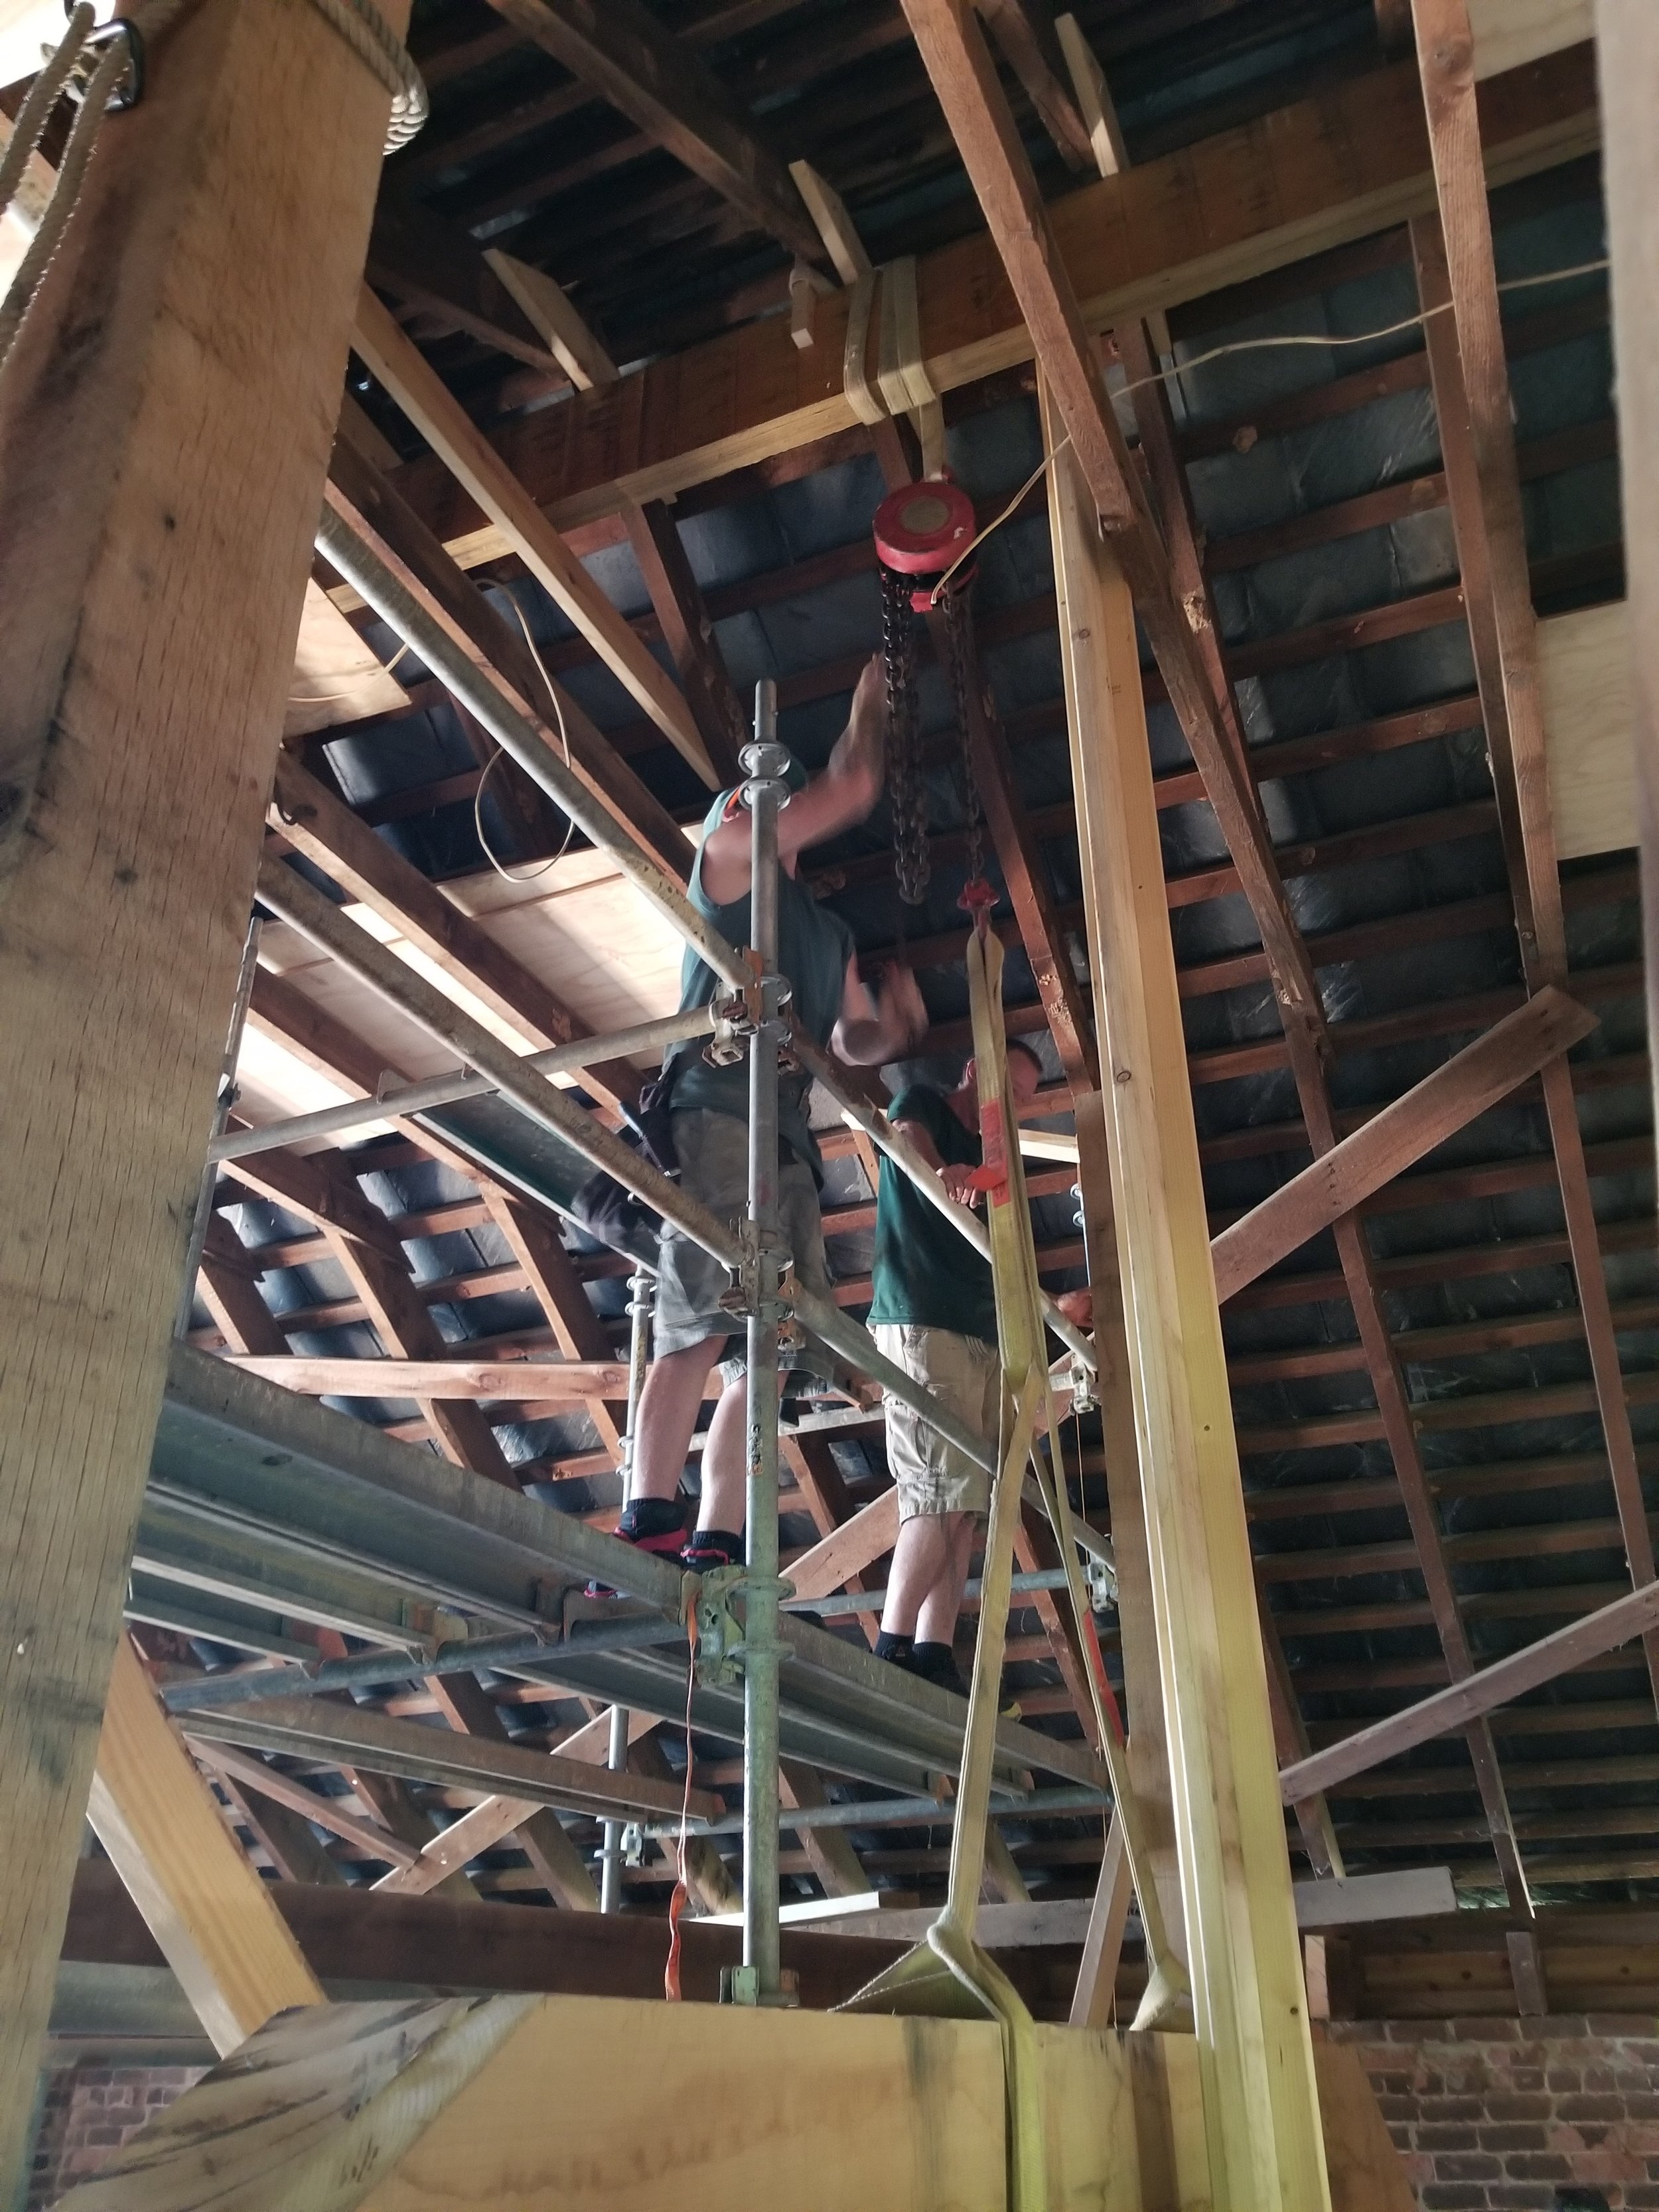 Work on interior roof structure